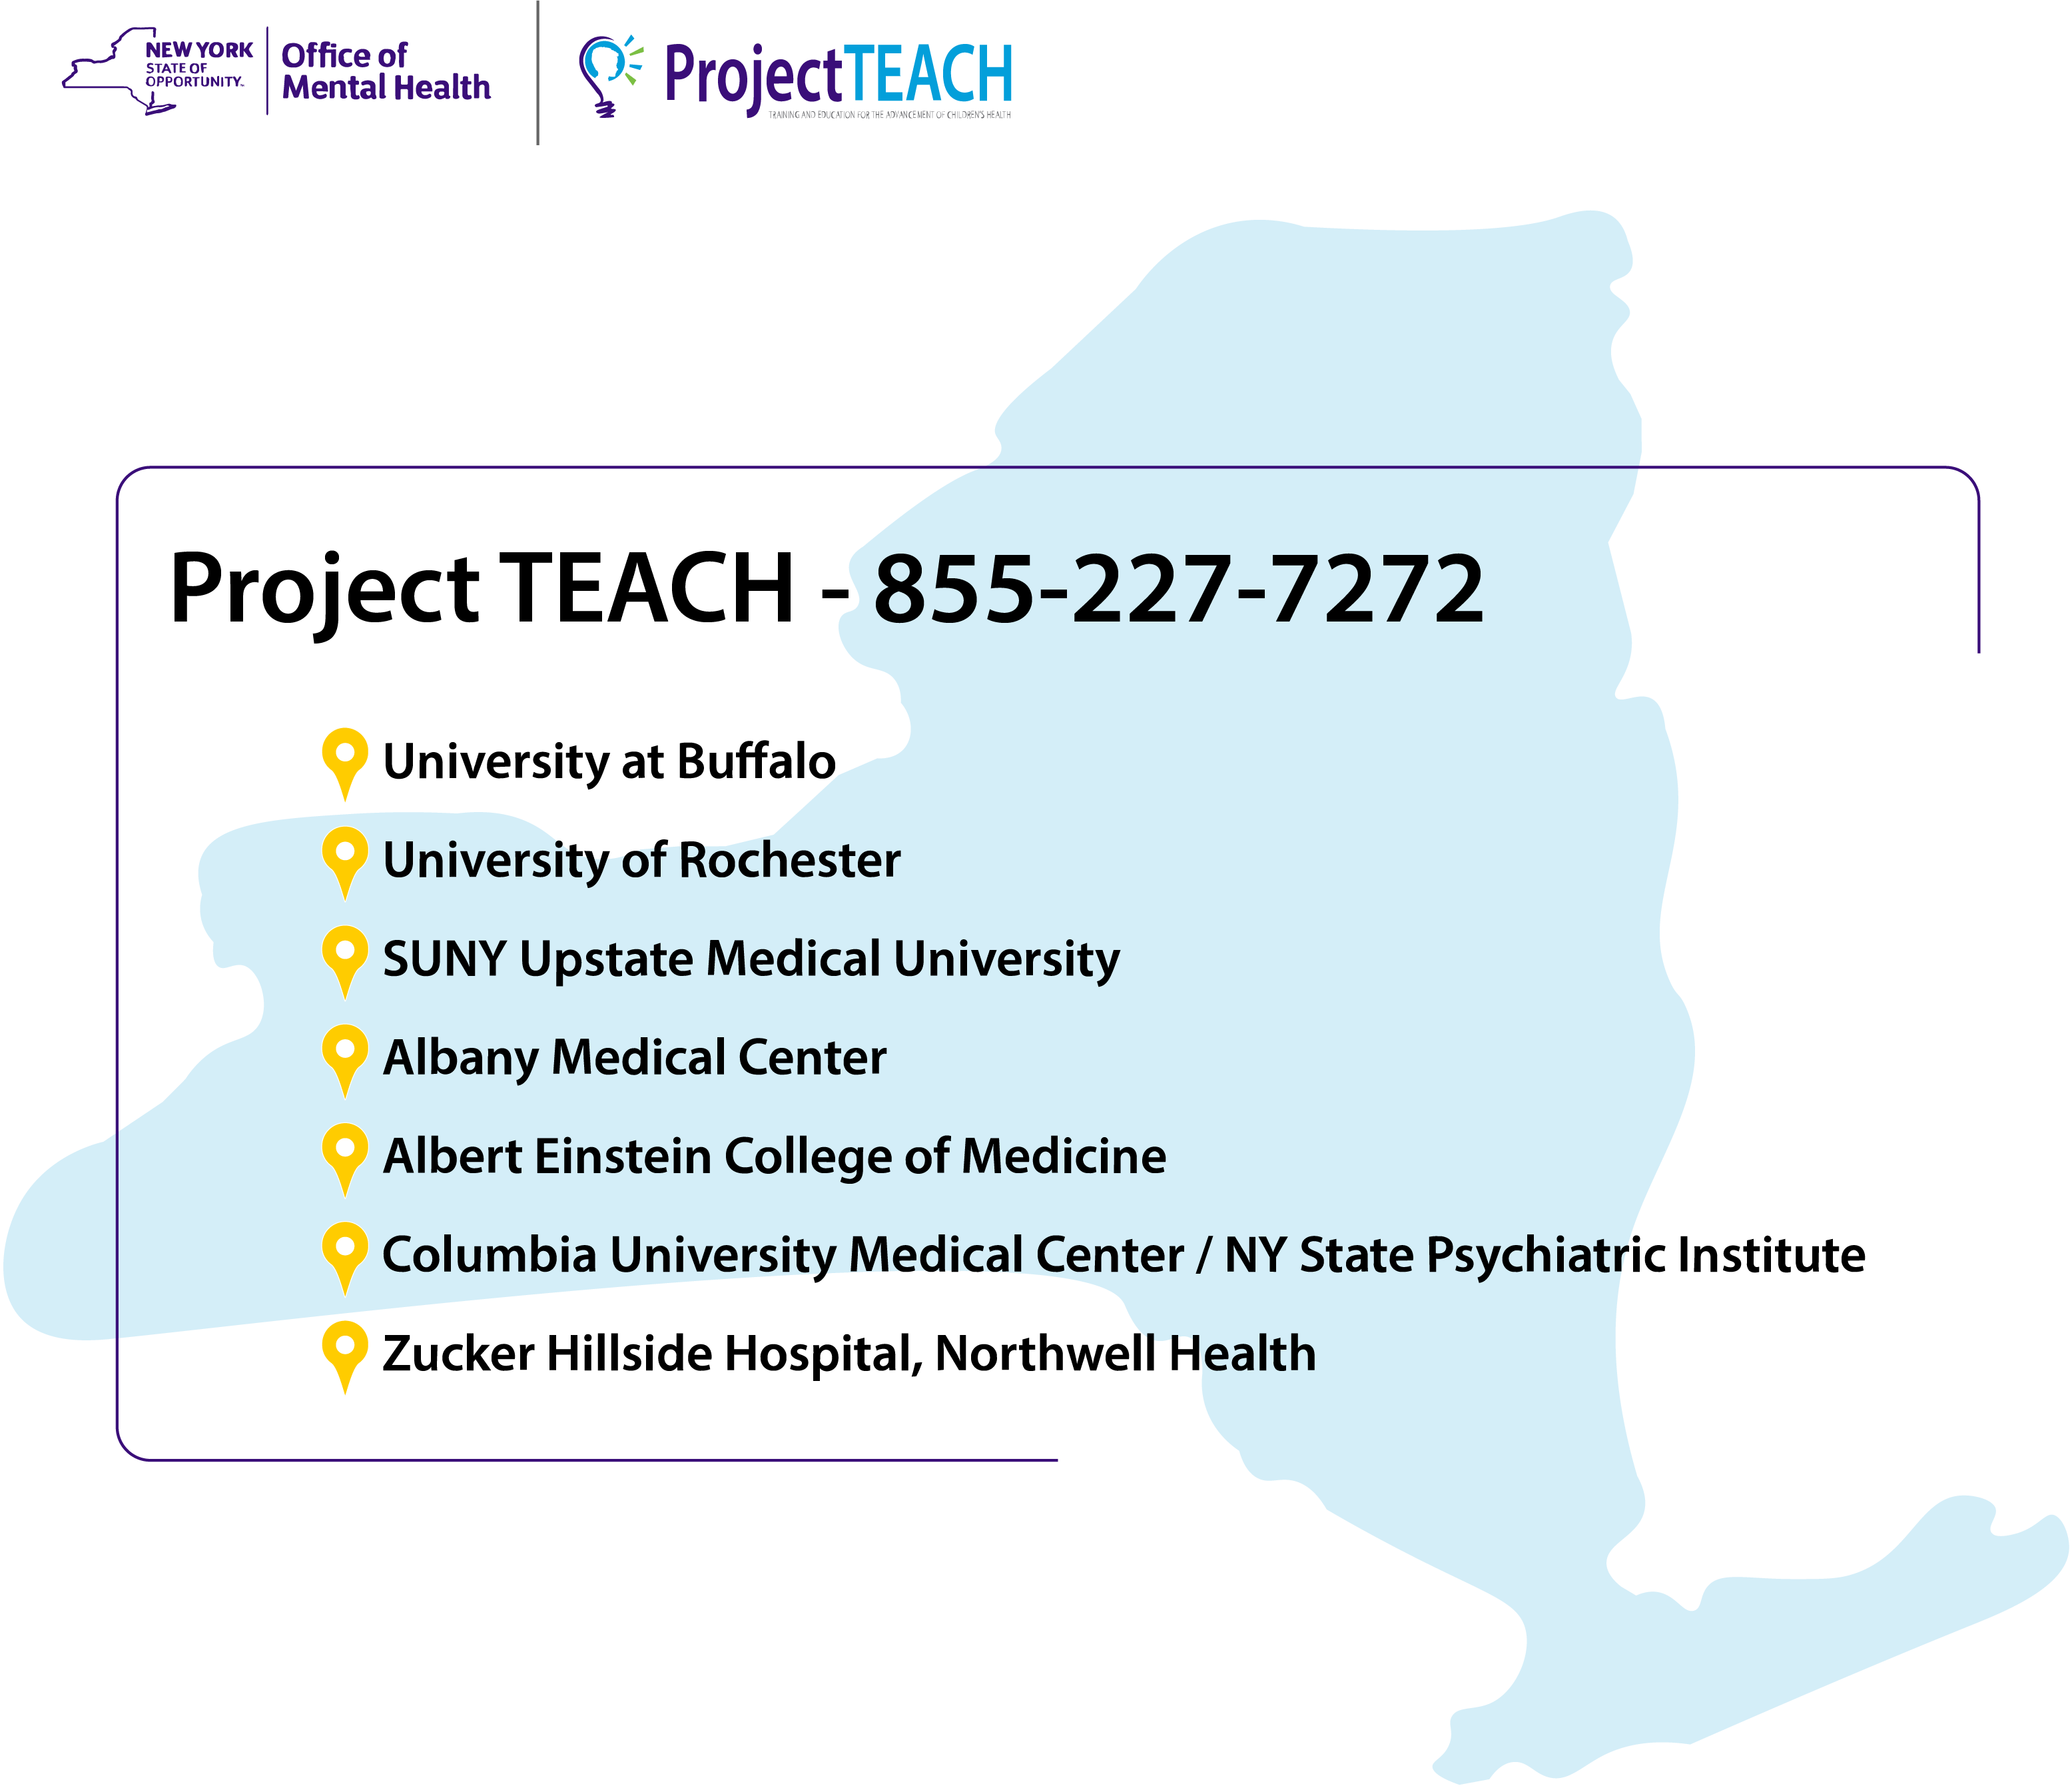 Project TEACH Map of New York